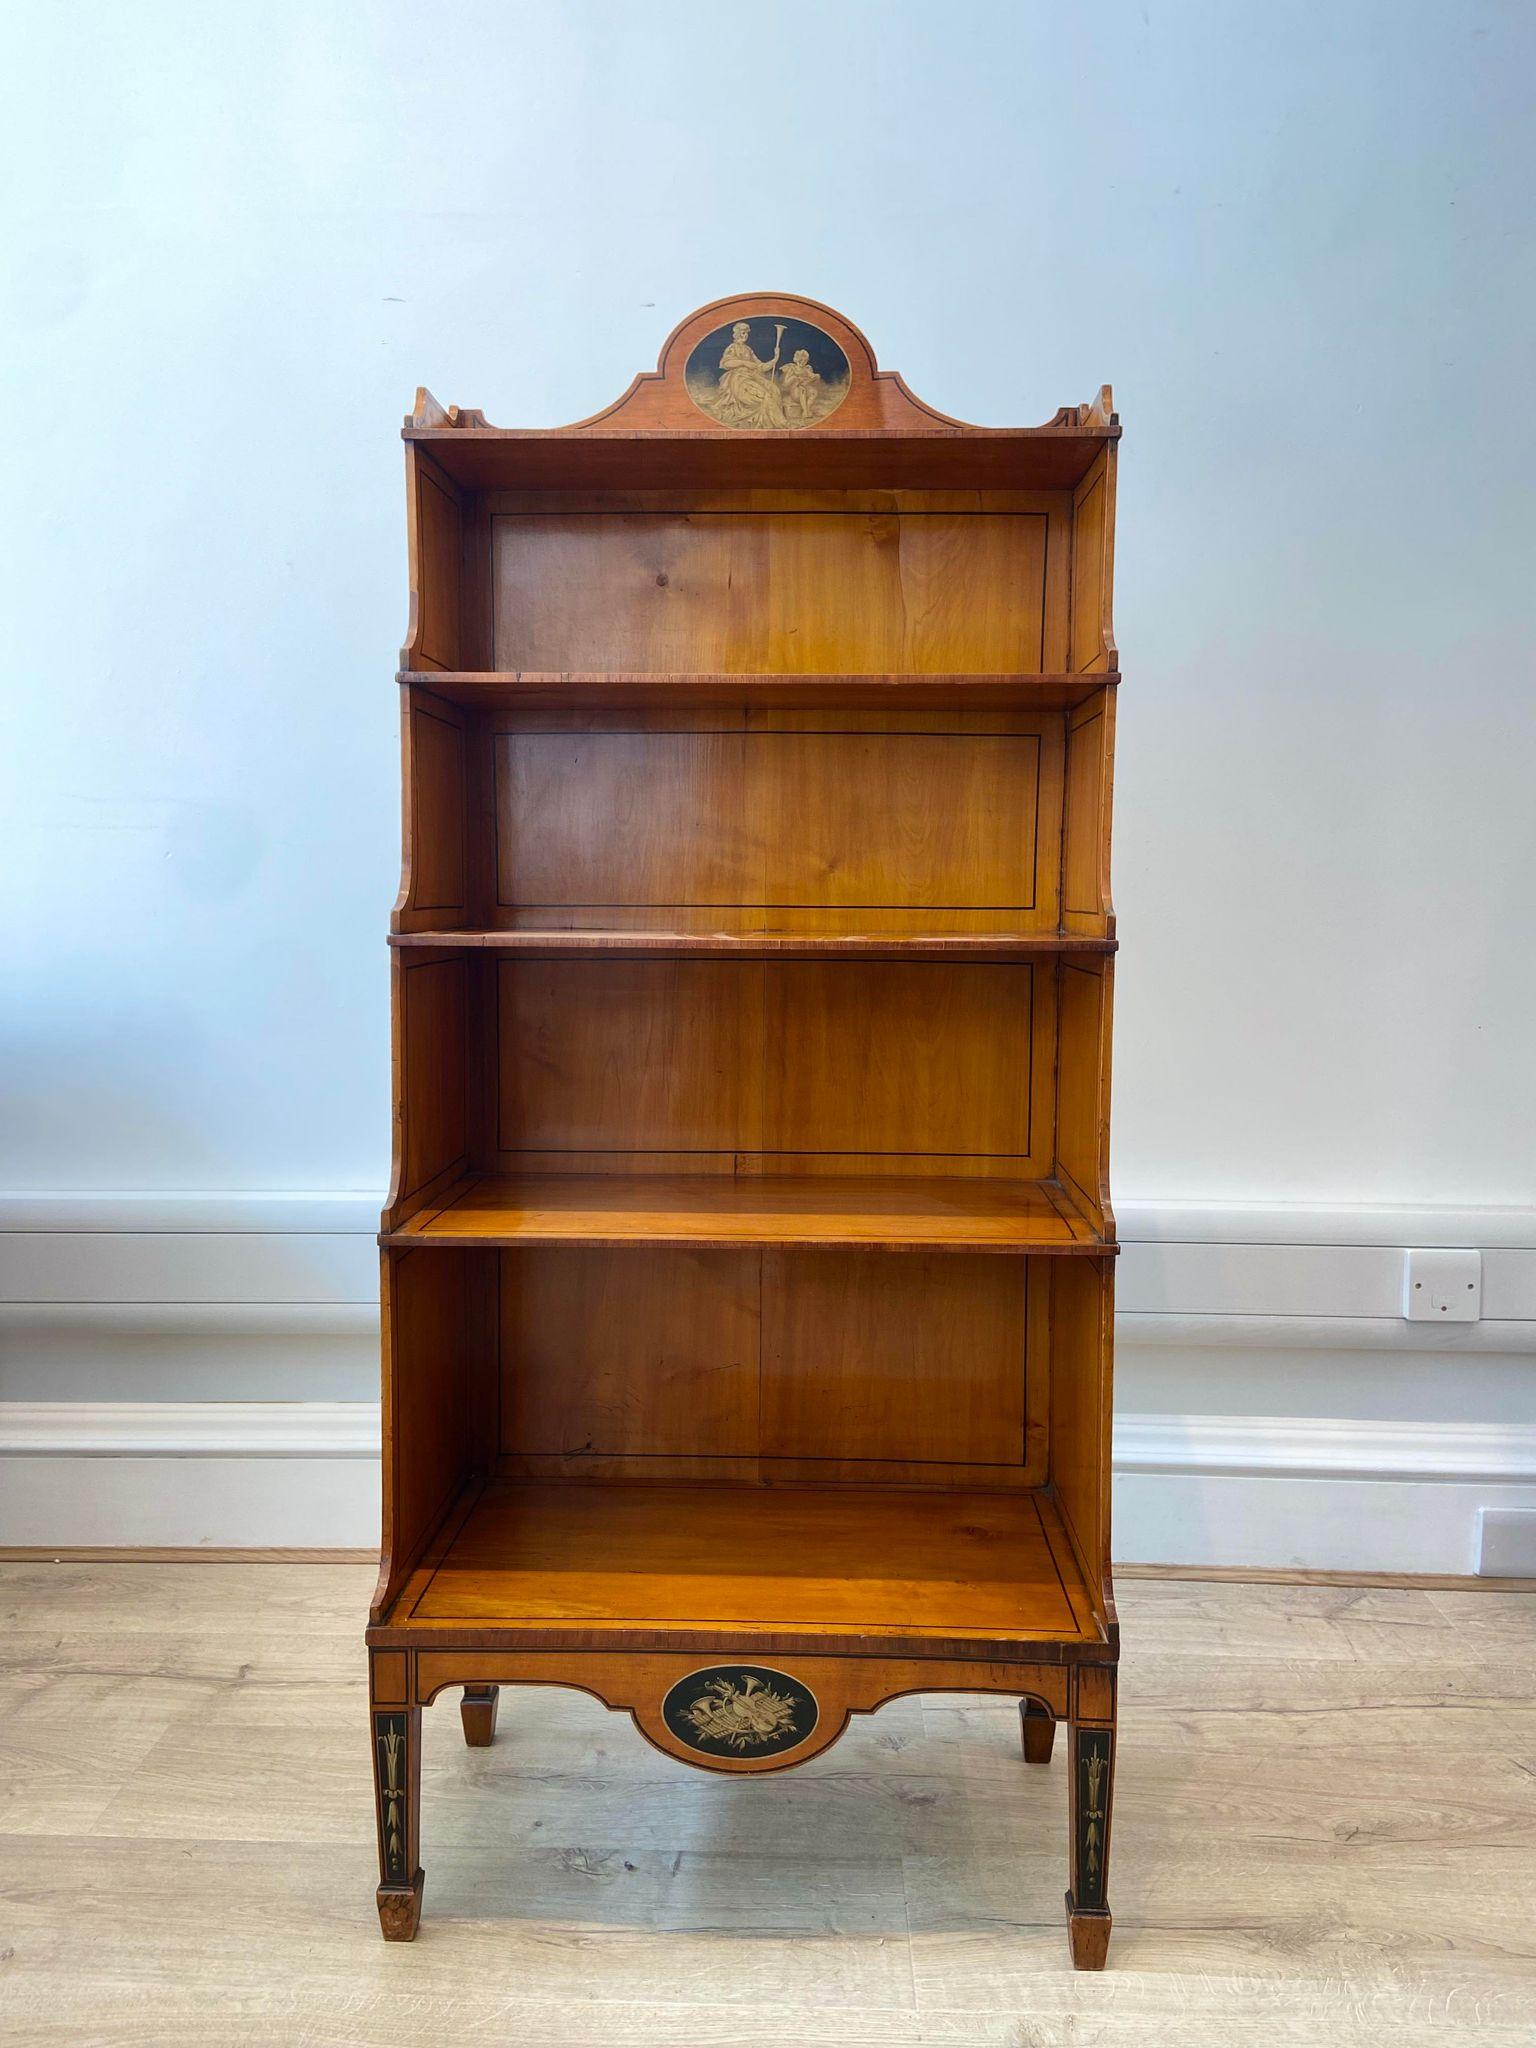 A beautiful and rare antique Regency satinwood free standing shelving unit, circa 1800 

Featuring 4 shelves and fine hand painted details. 

This piece was purchased via Asprey & Company in 1985 with receipt available - valuing the item at £4,500.